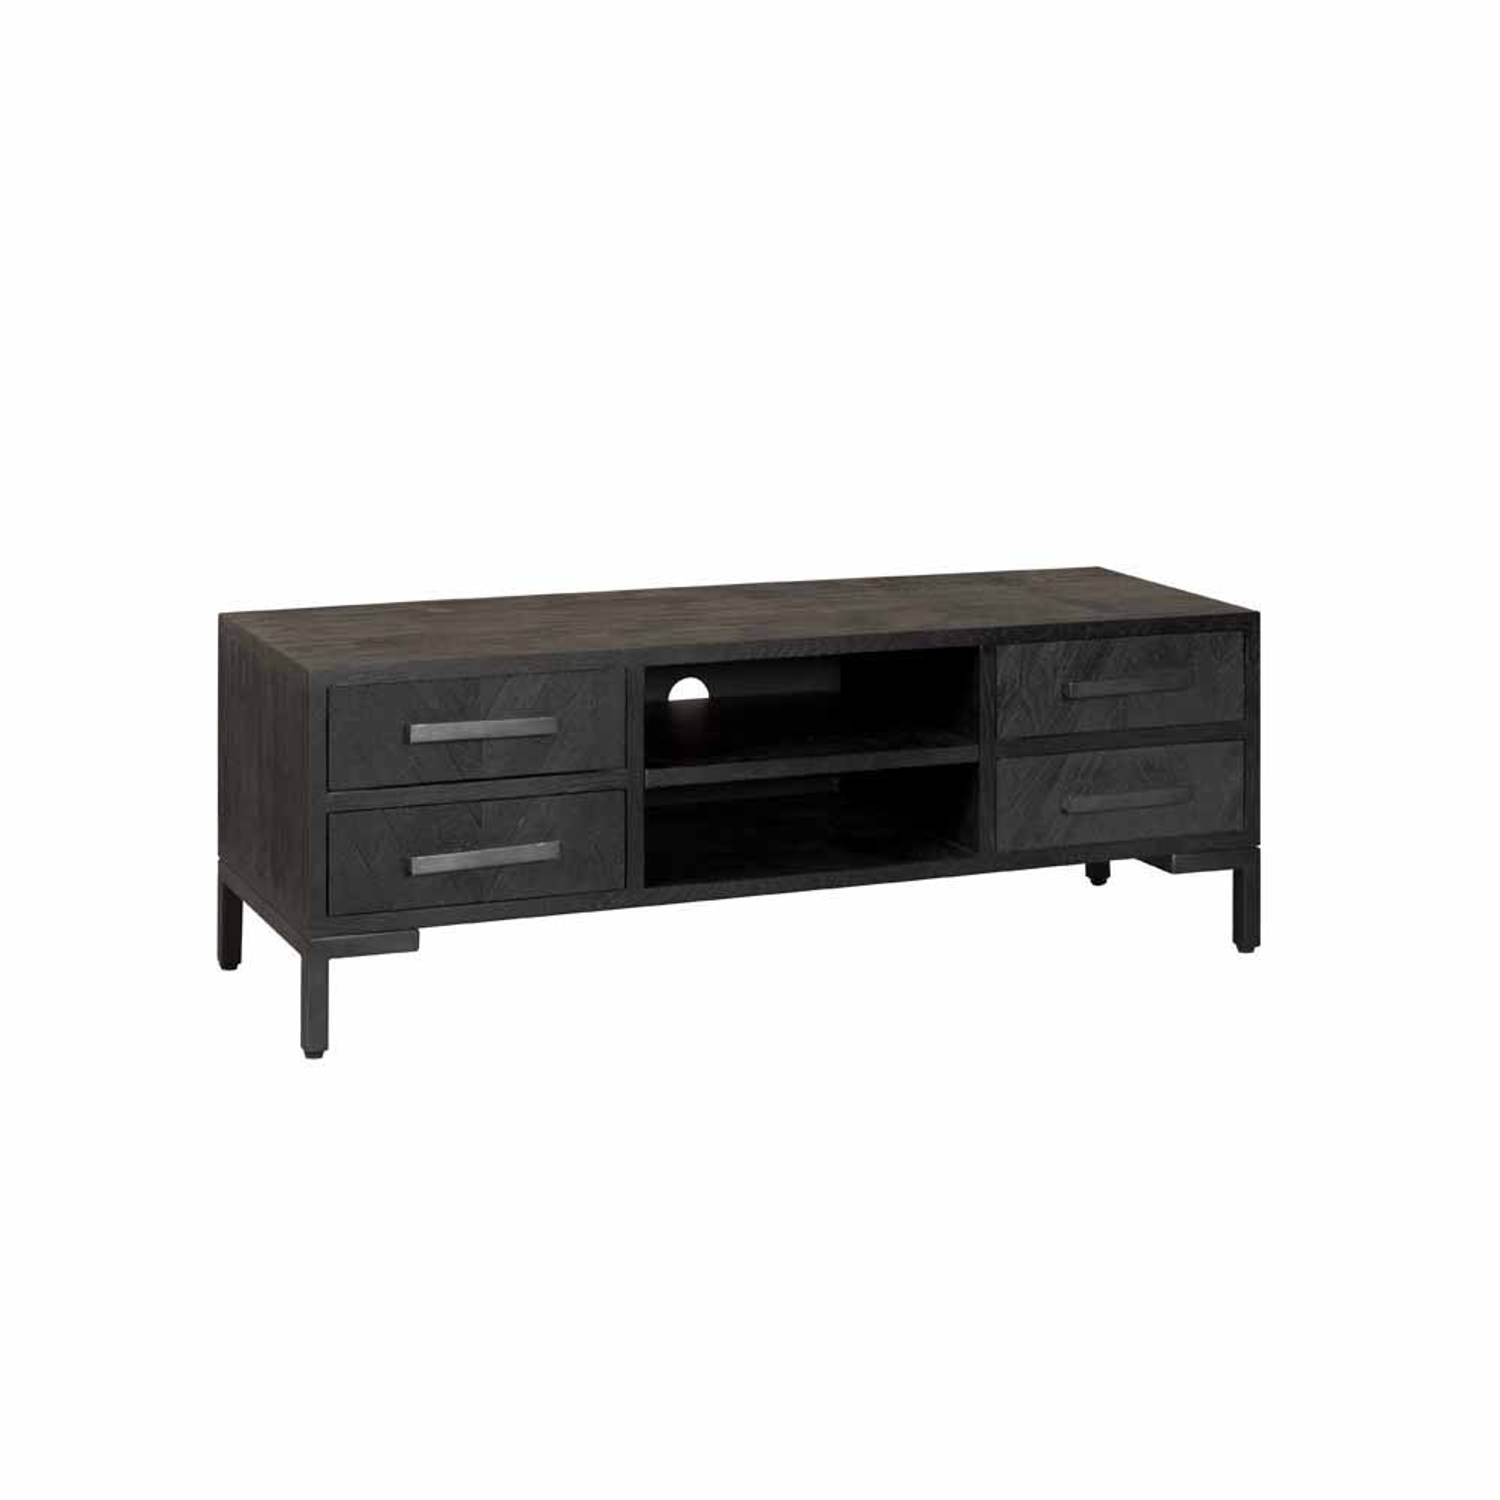 TOFF Ziano TV stand 4 drws - 145x45x50